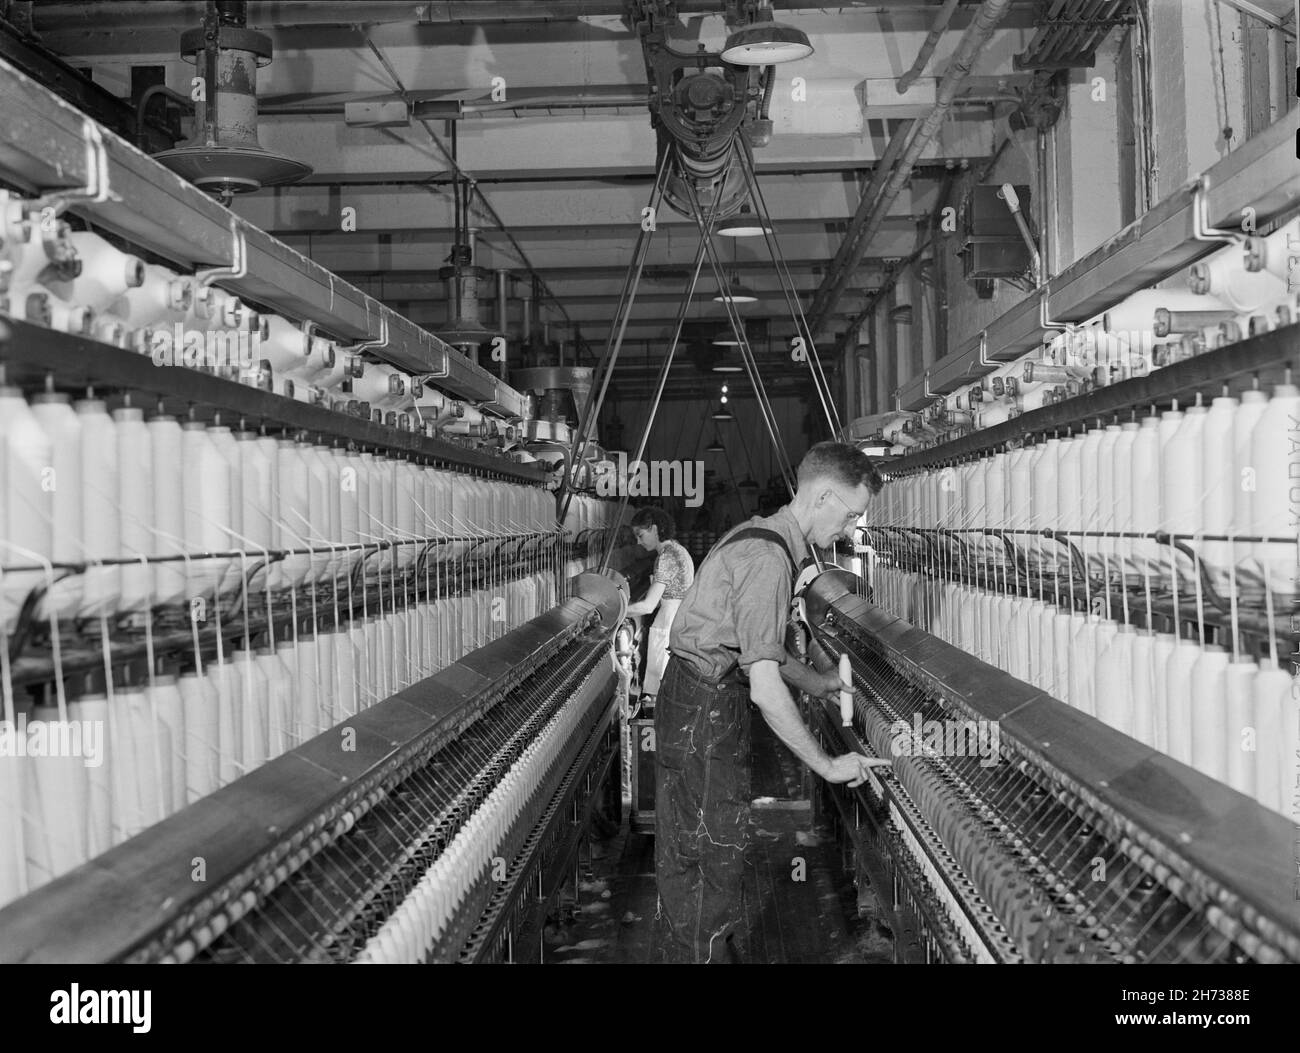 https://c8.alamy.com/comp/2H7388E/worker-at-mary-leila-cotton-mill-greensboro-georgia-usa-jack-delano-us-farm-security-administration-us-office-of-war-information-photograph-collection-october-2H7388E.jpg